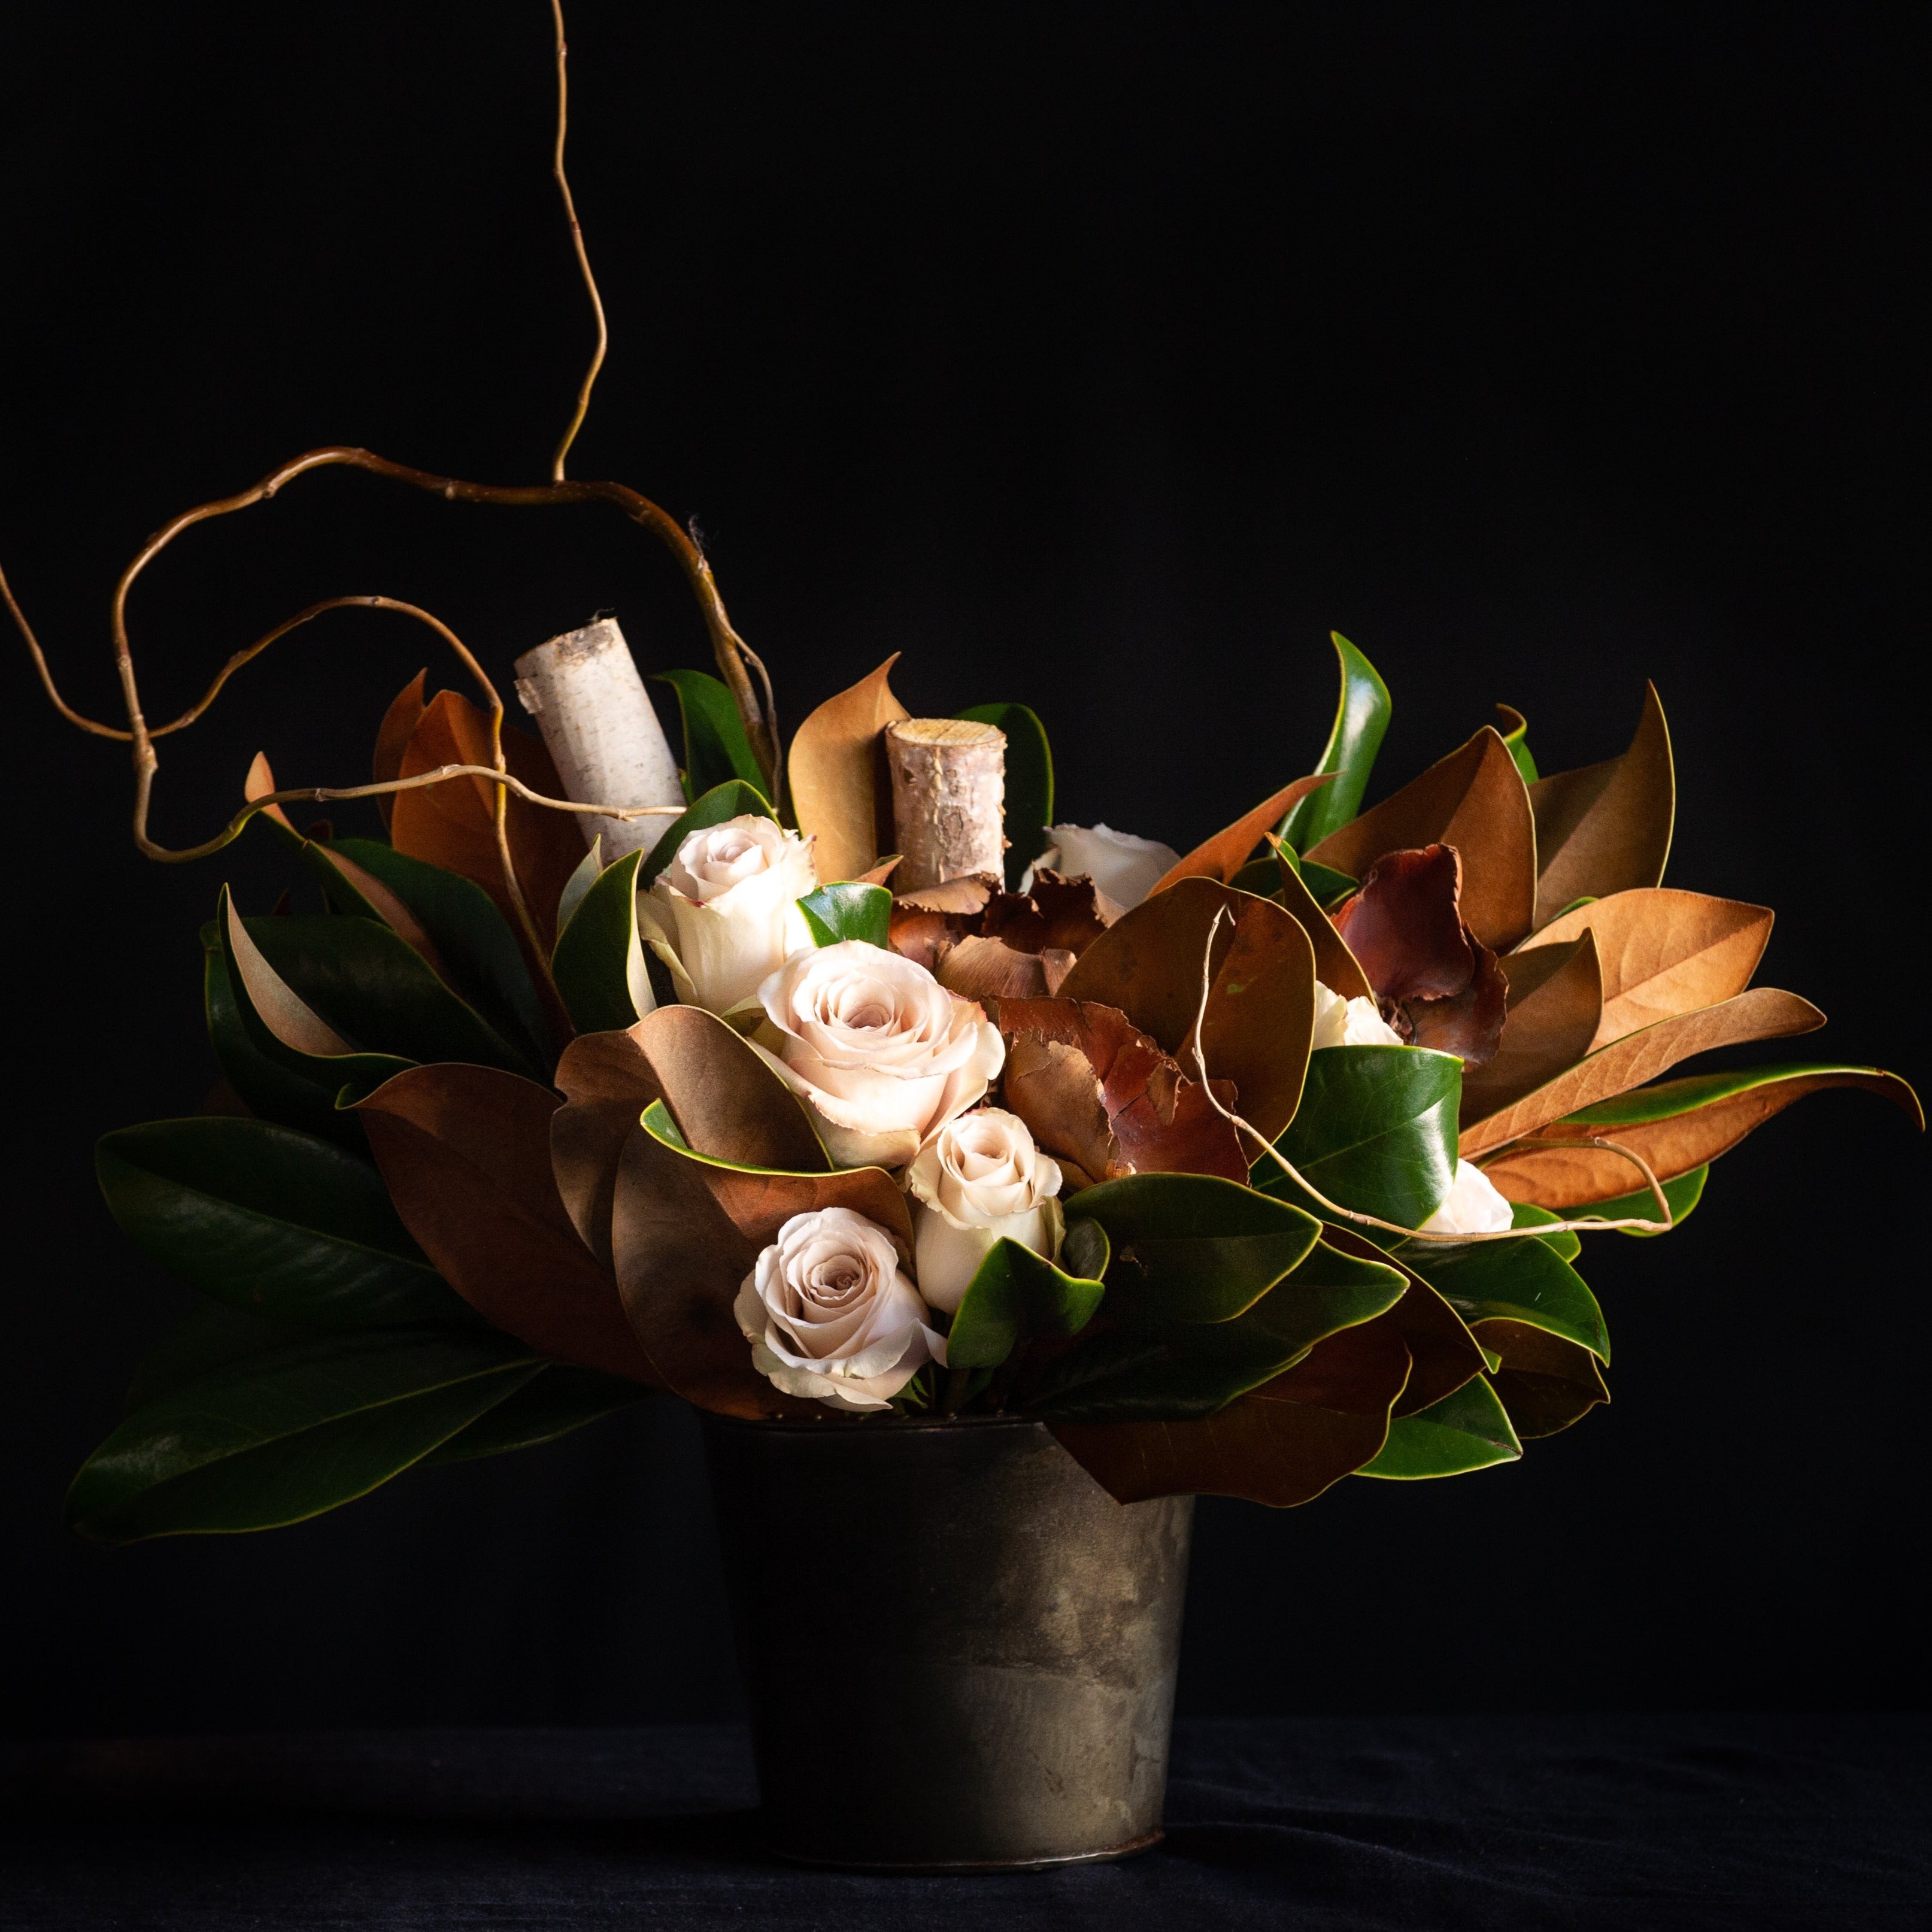 Taupe roses nestled in between magnolia leaves, birch, and curly willow. All around design. created by a local florist